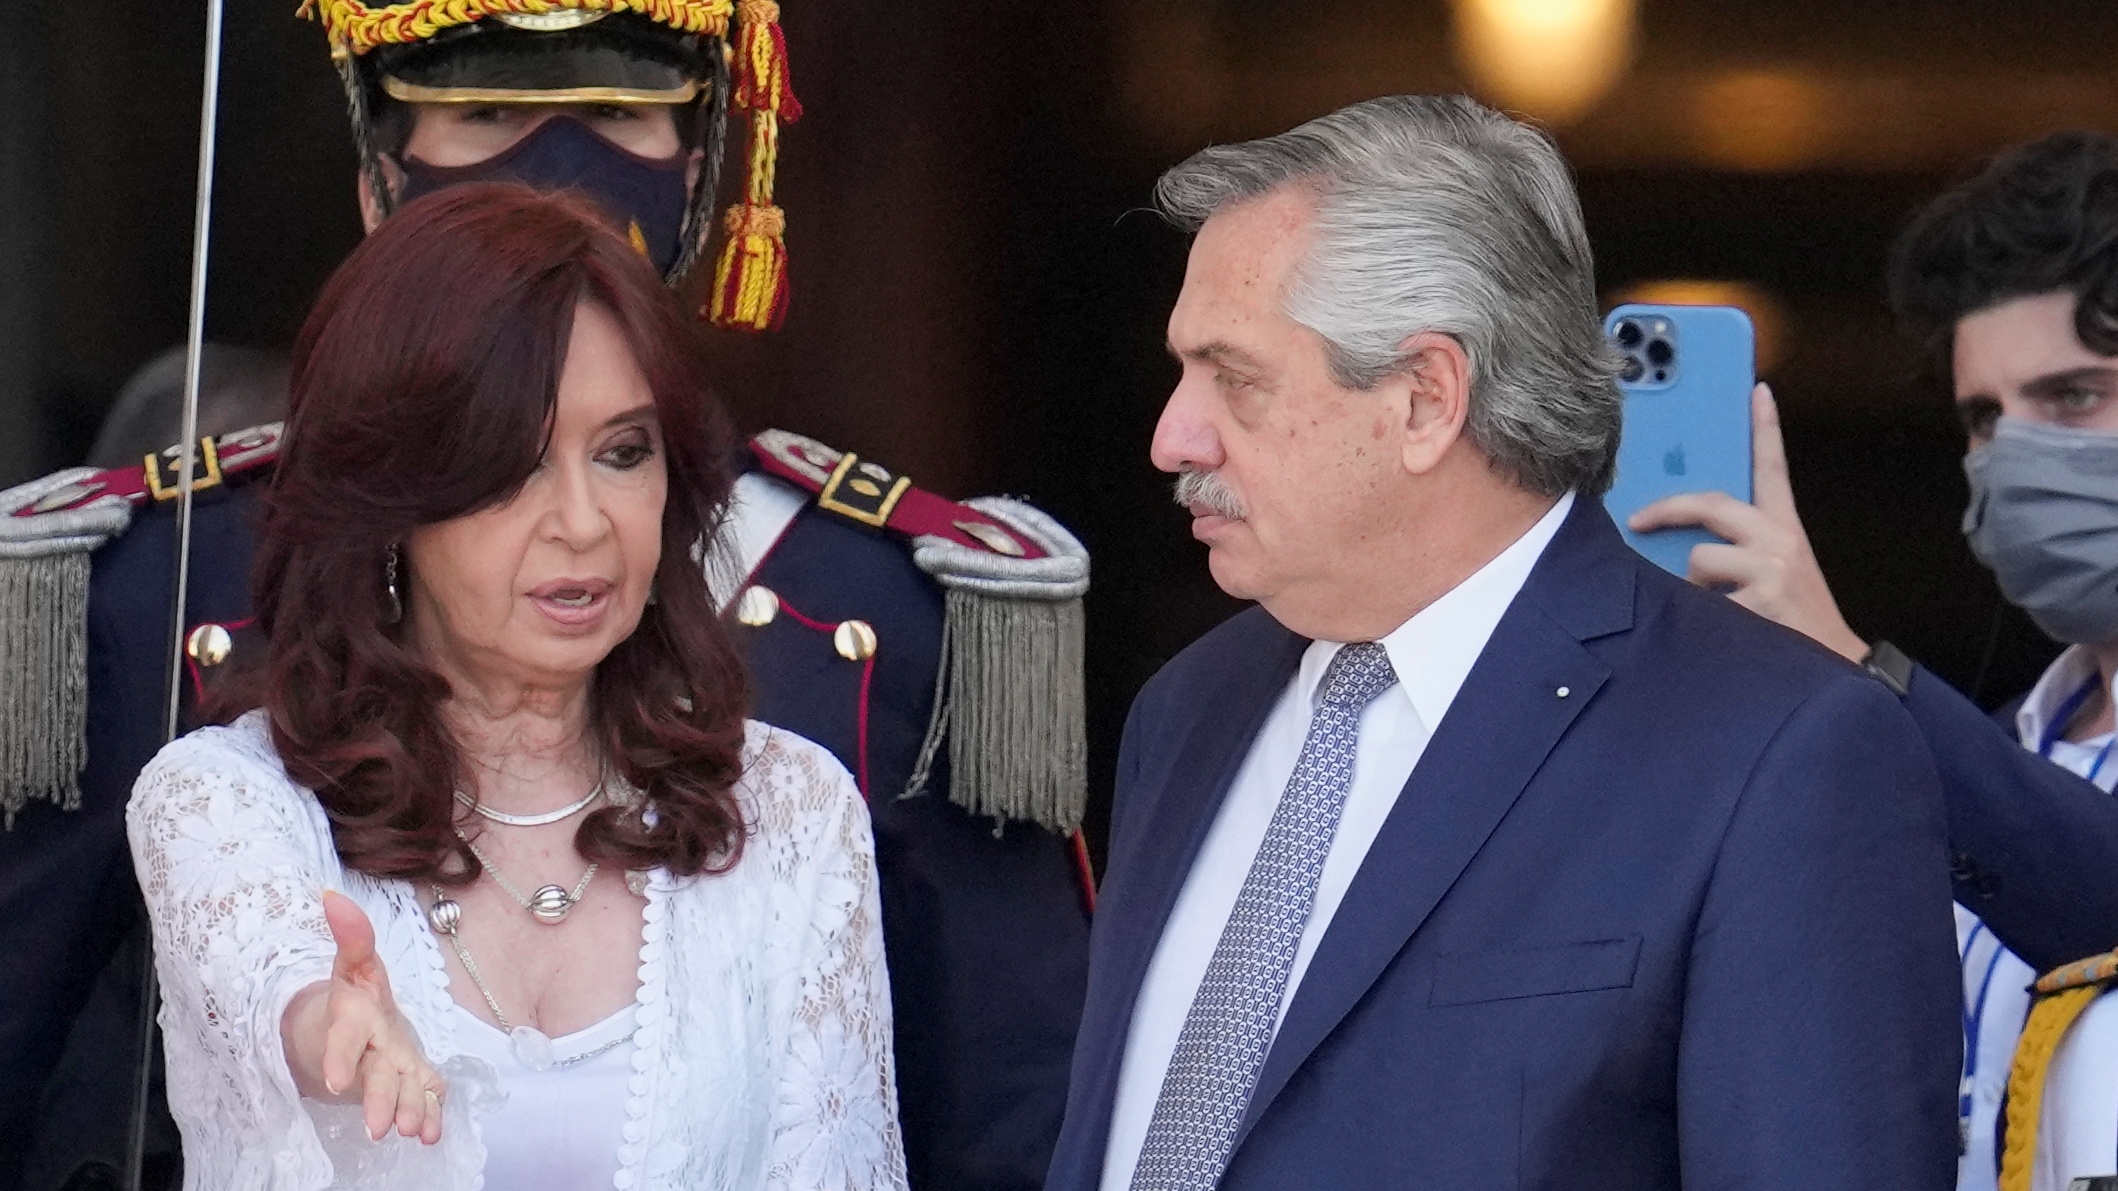 The internal one between sectors that respond to Cristina Kirchner and Alberto Fernández does not stop (REUTERS)